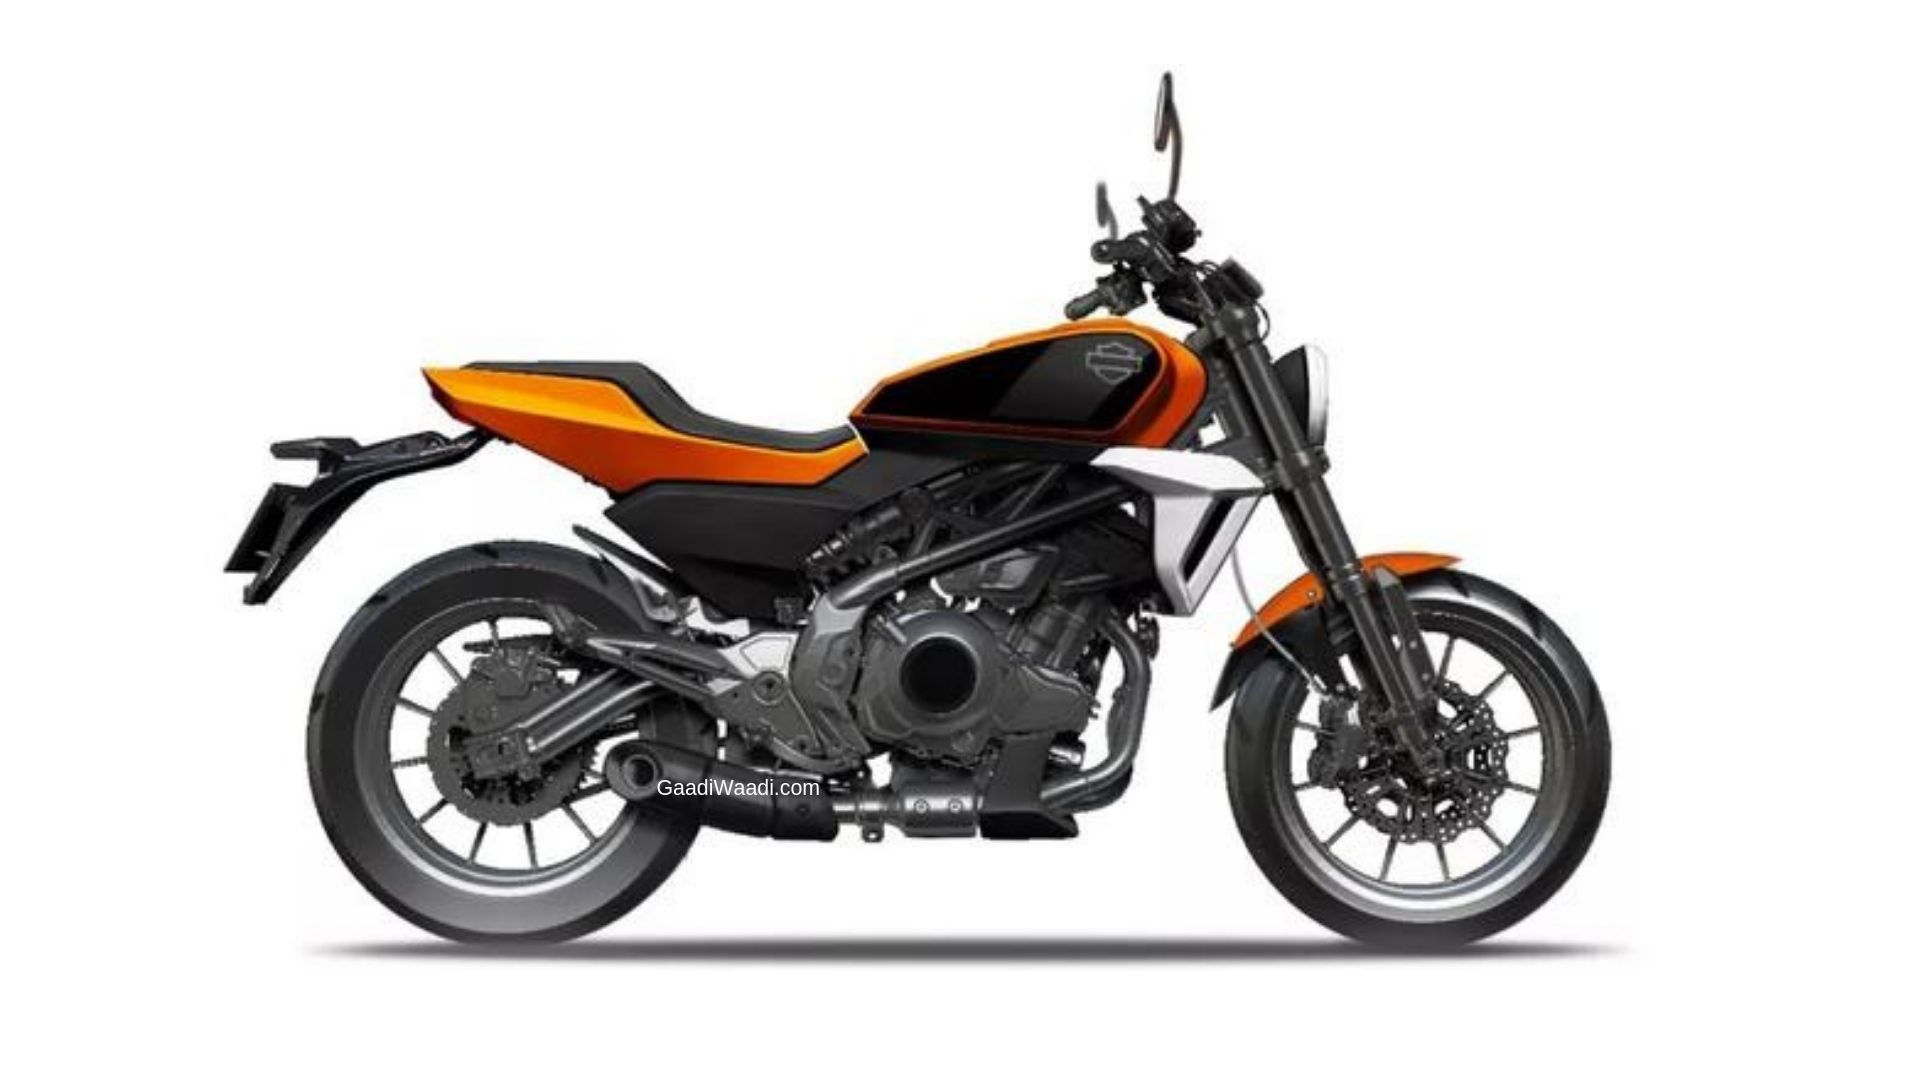 Harley Davidson 338cc, Parallel-Twin Engined Affordable Motorcycle Coming